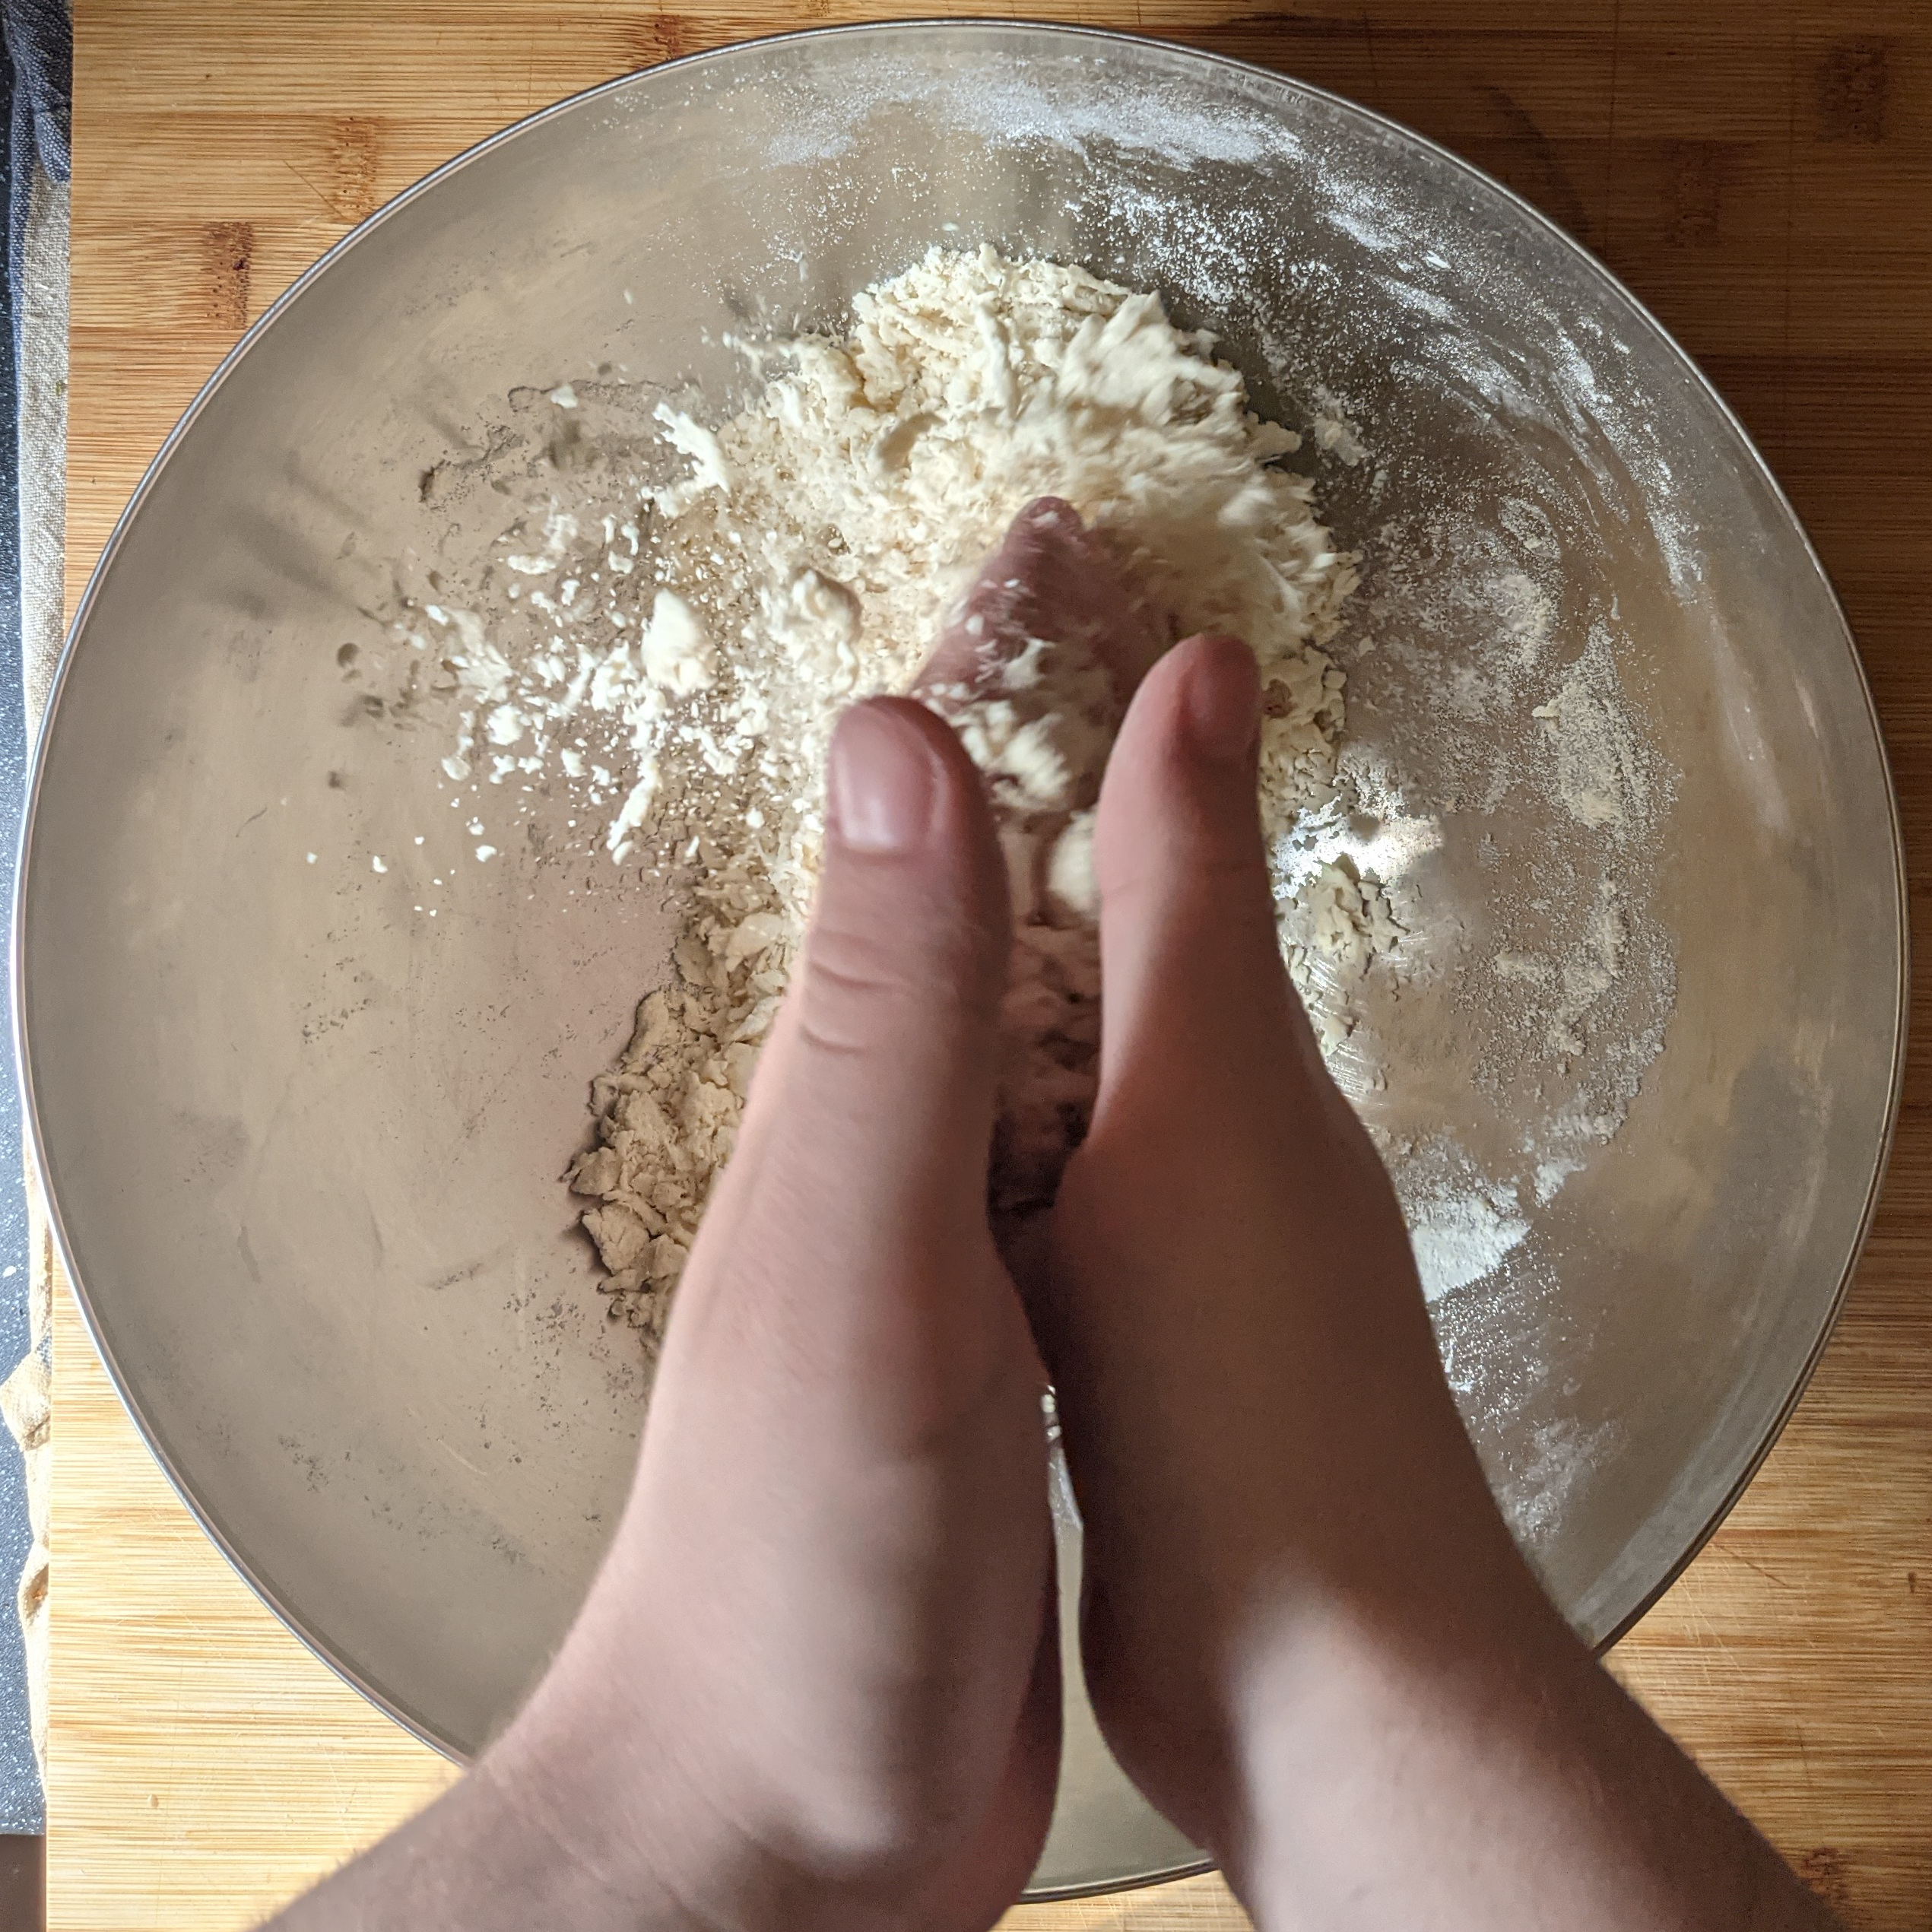 Rubbing flour with hands